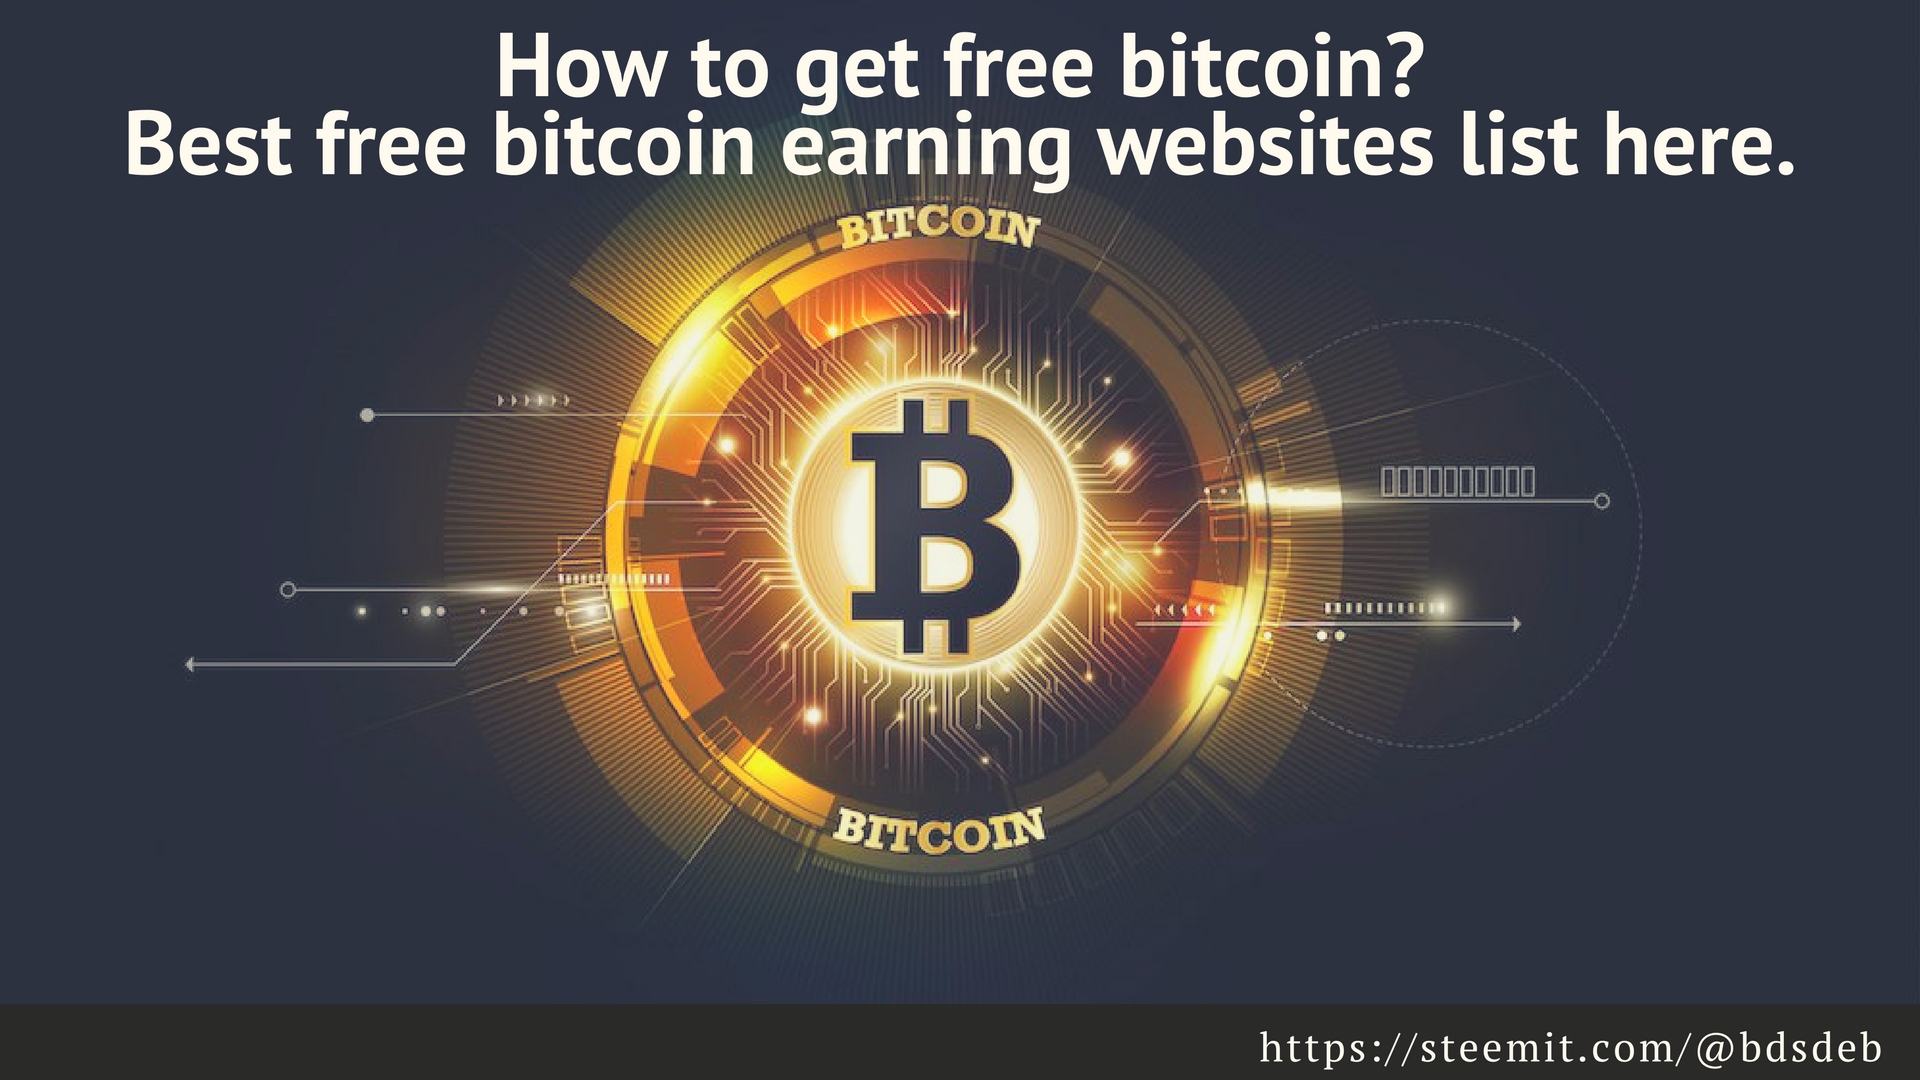 How can you get bitcoin for free